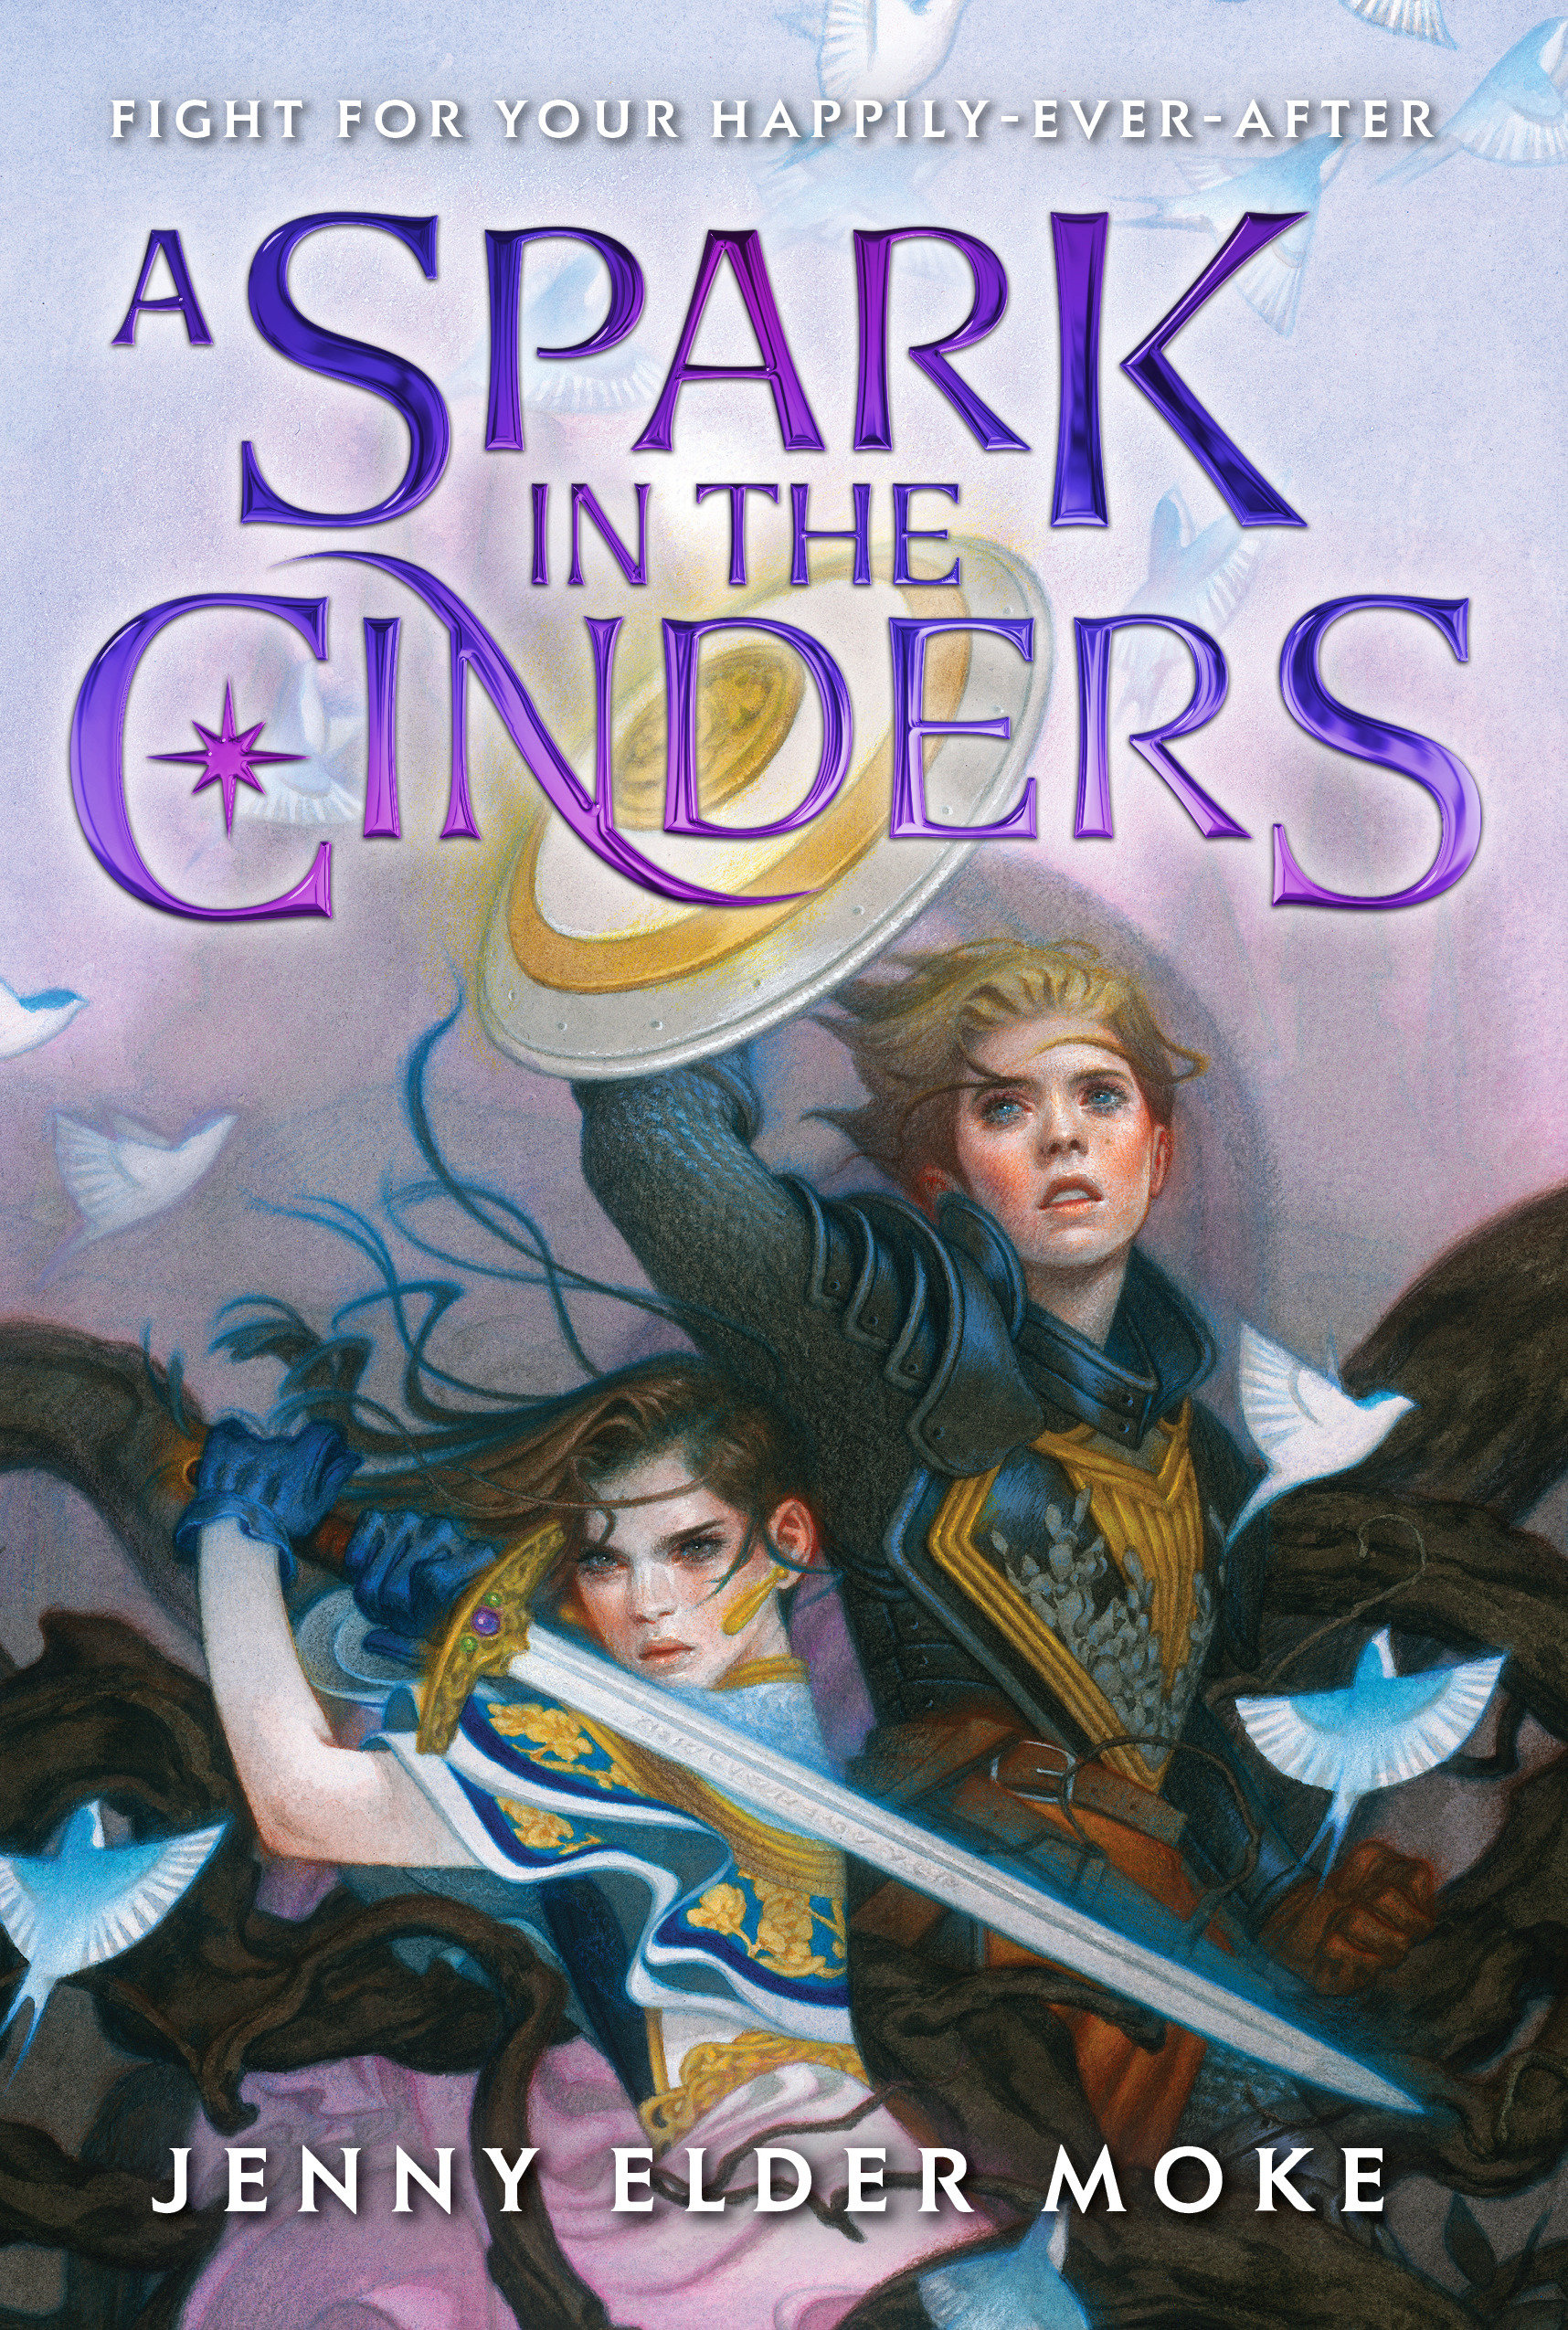 A Spark In The Cinders (Hardcover Book)